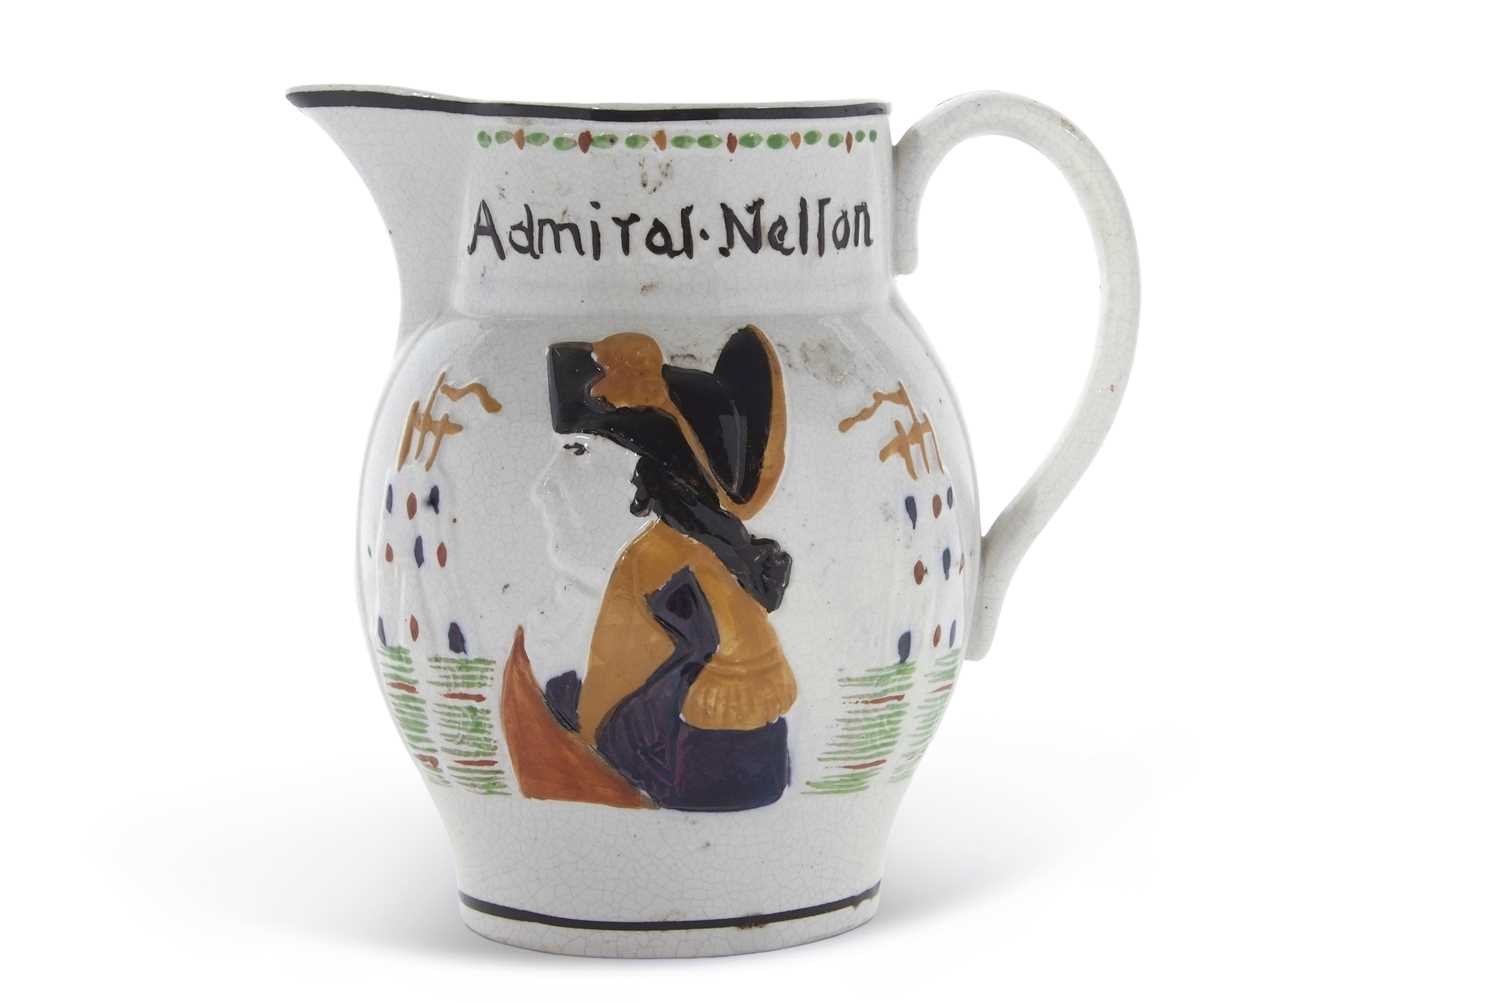 A Pratt Ware type jug modelled with Admiral Nelson in relief, the reverse with Captain Hardy, 15cm